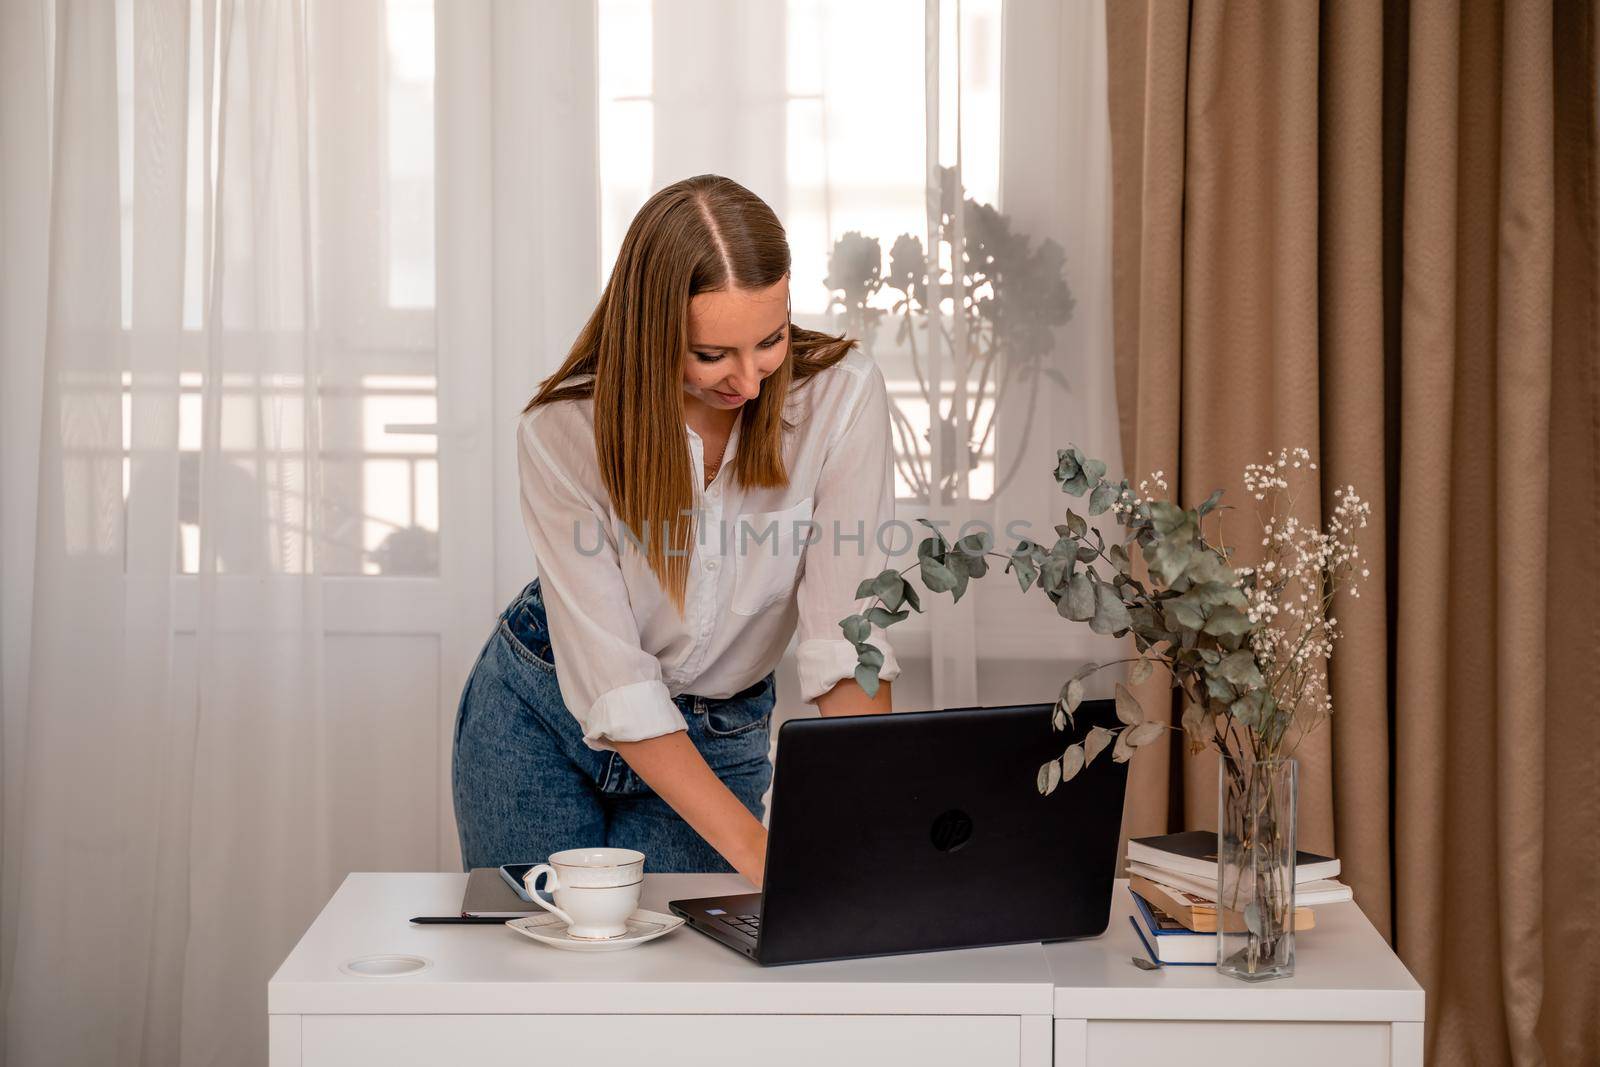 European professional woman is sitting with a laptop at a table in a home office, a positive woman is studying while working on a PC. She is wearing a beige jacket and jeans and is on the phone. by Matiunina